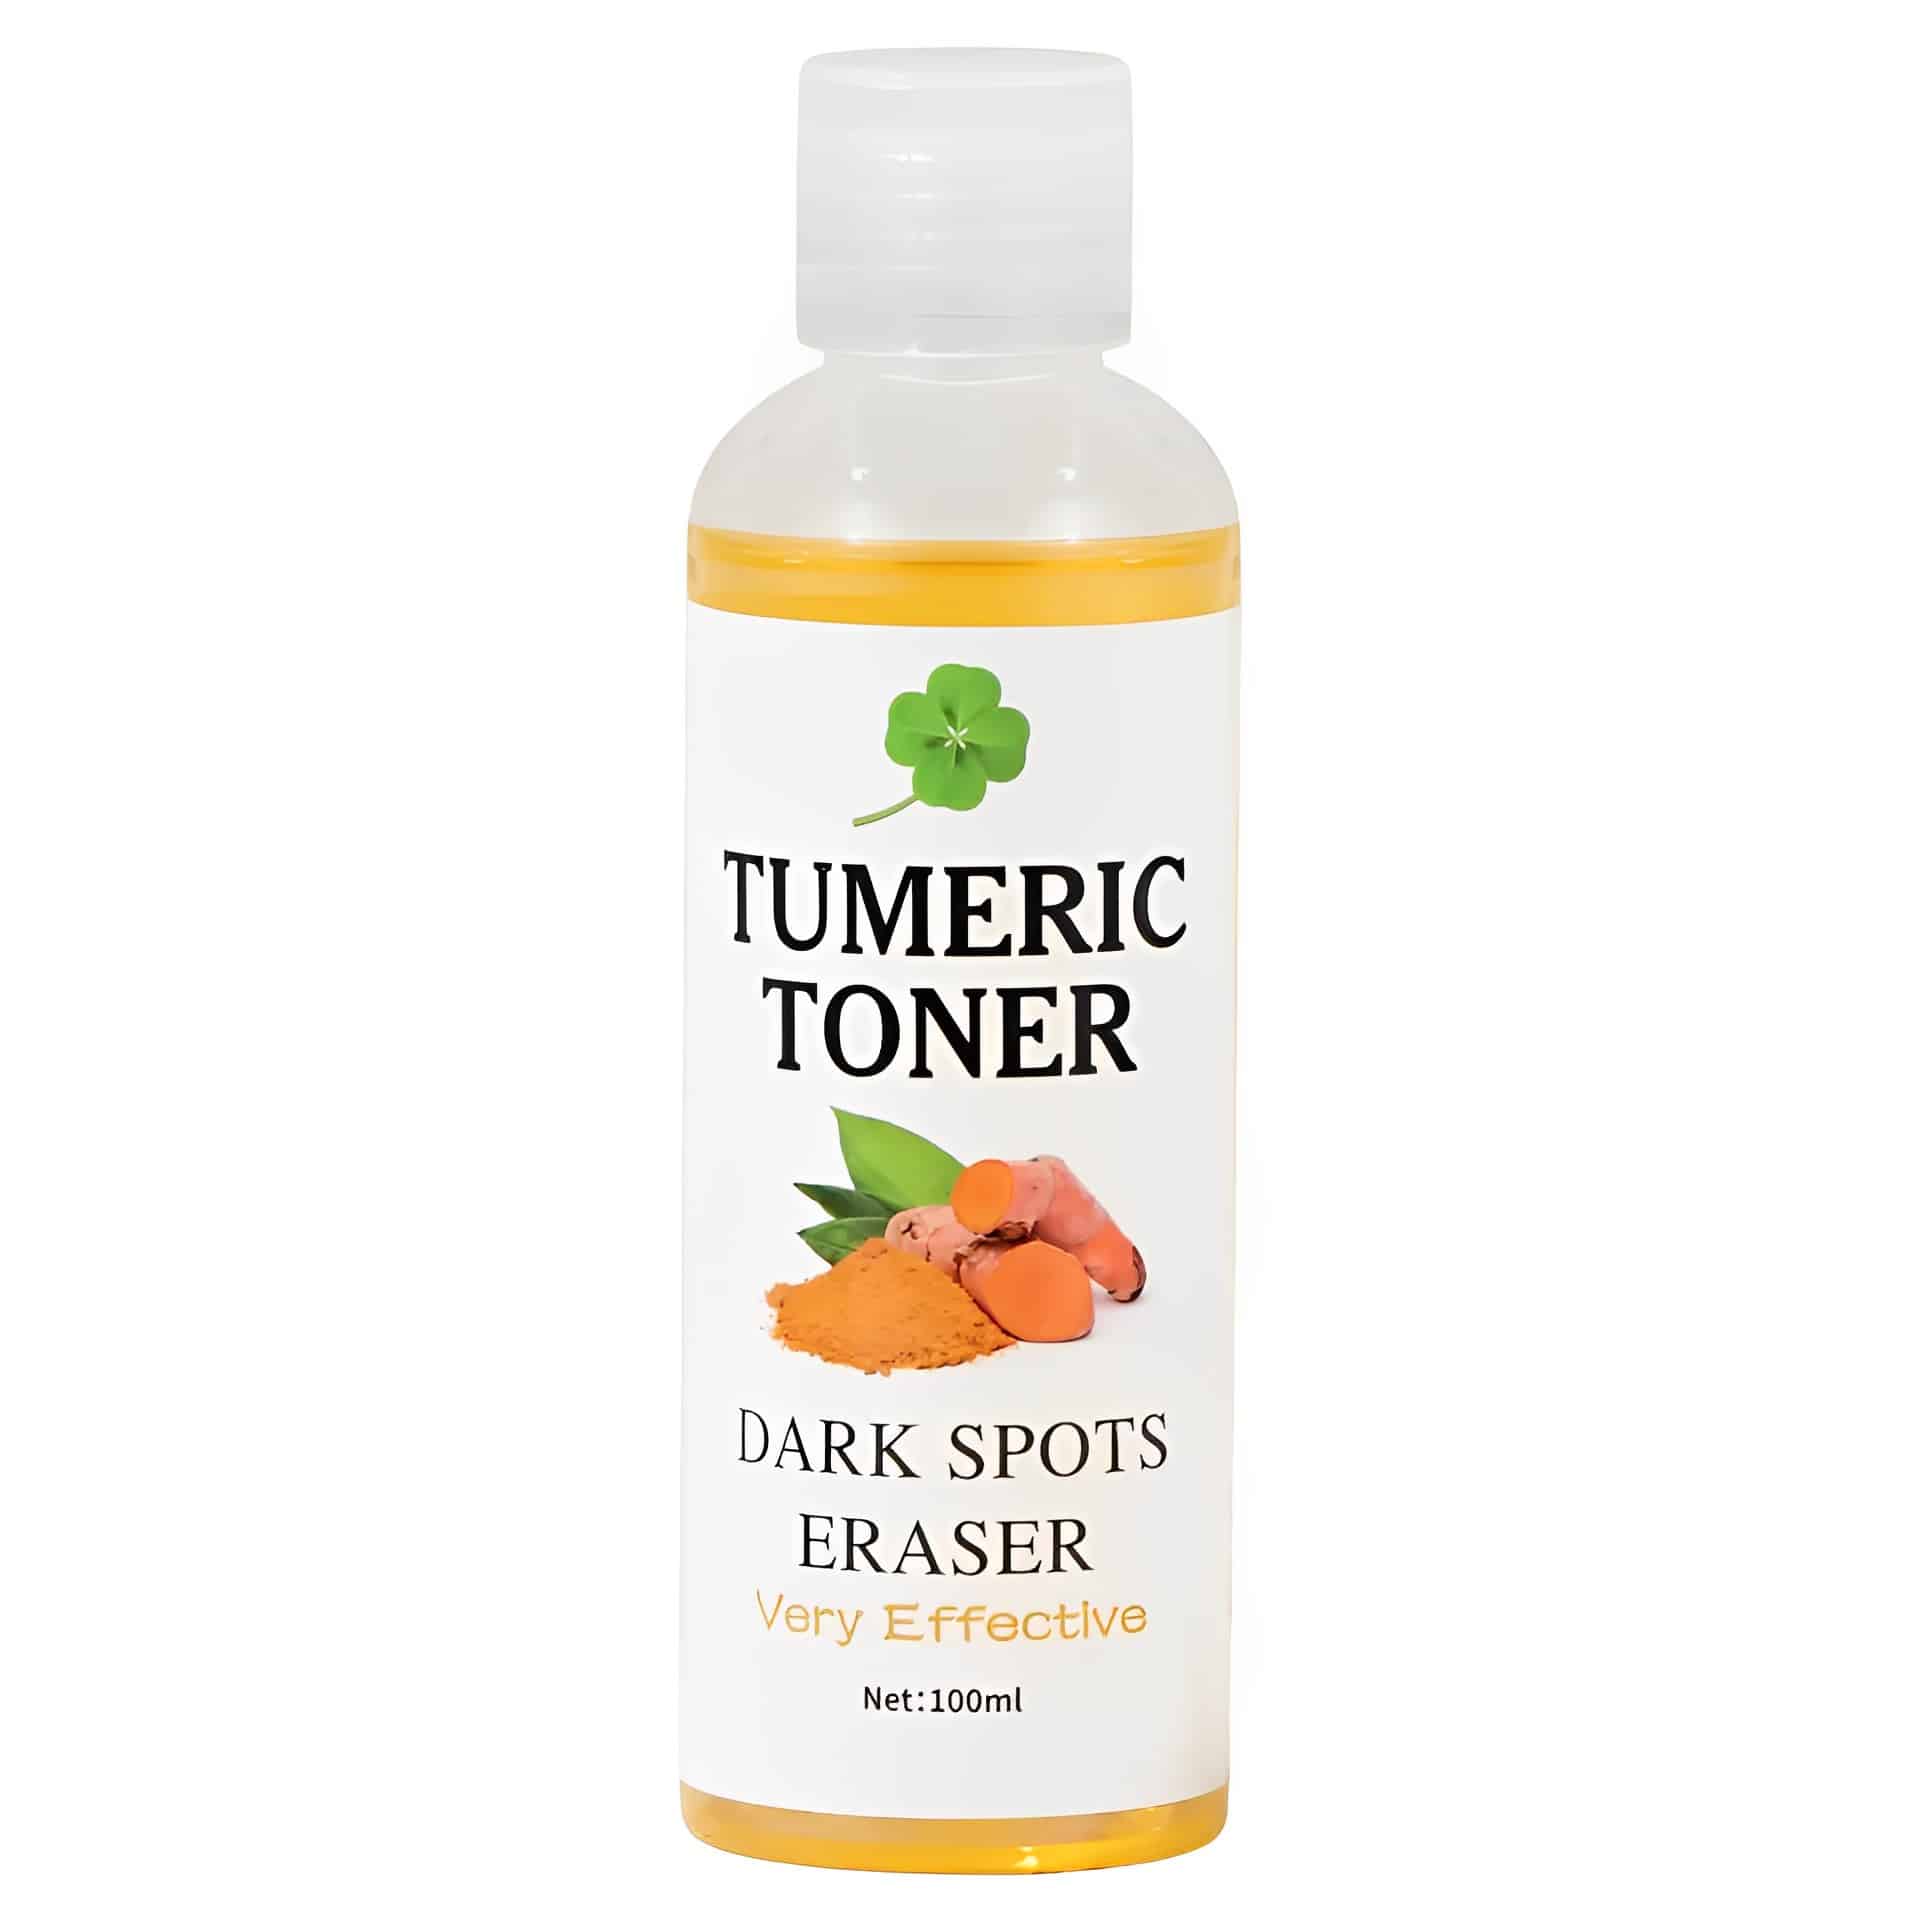 This Turmeric Acne Dark Spots Eraser is very effective, it will heal and improve hyperpigmentation.